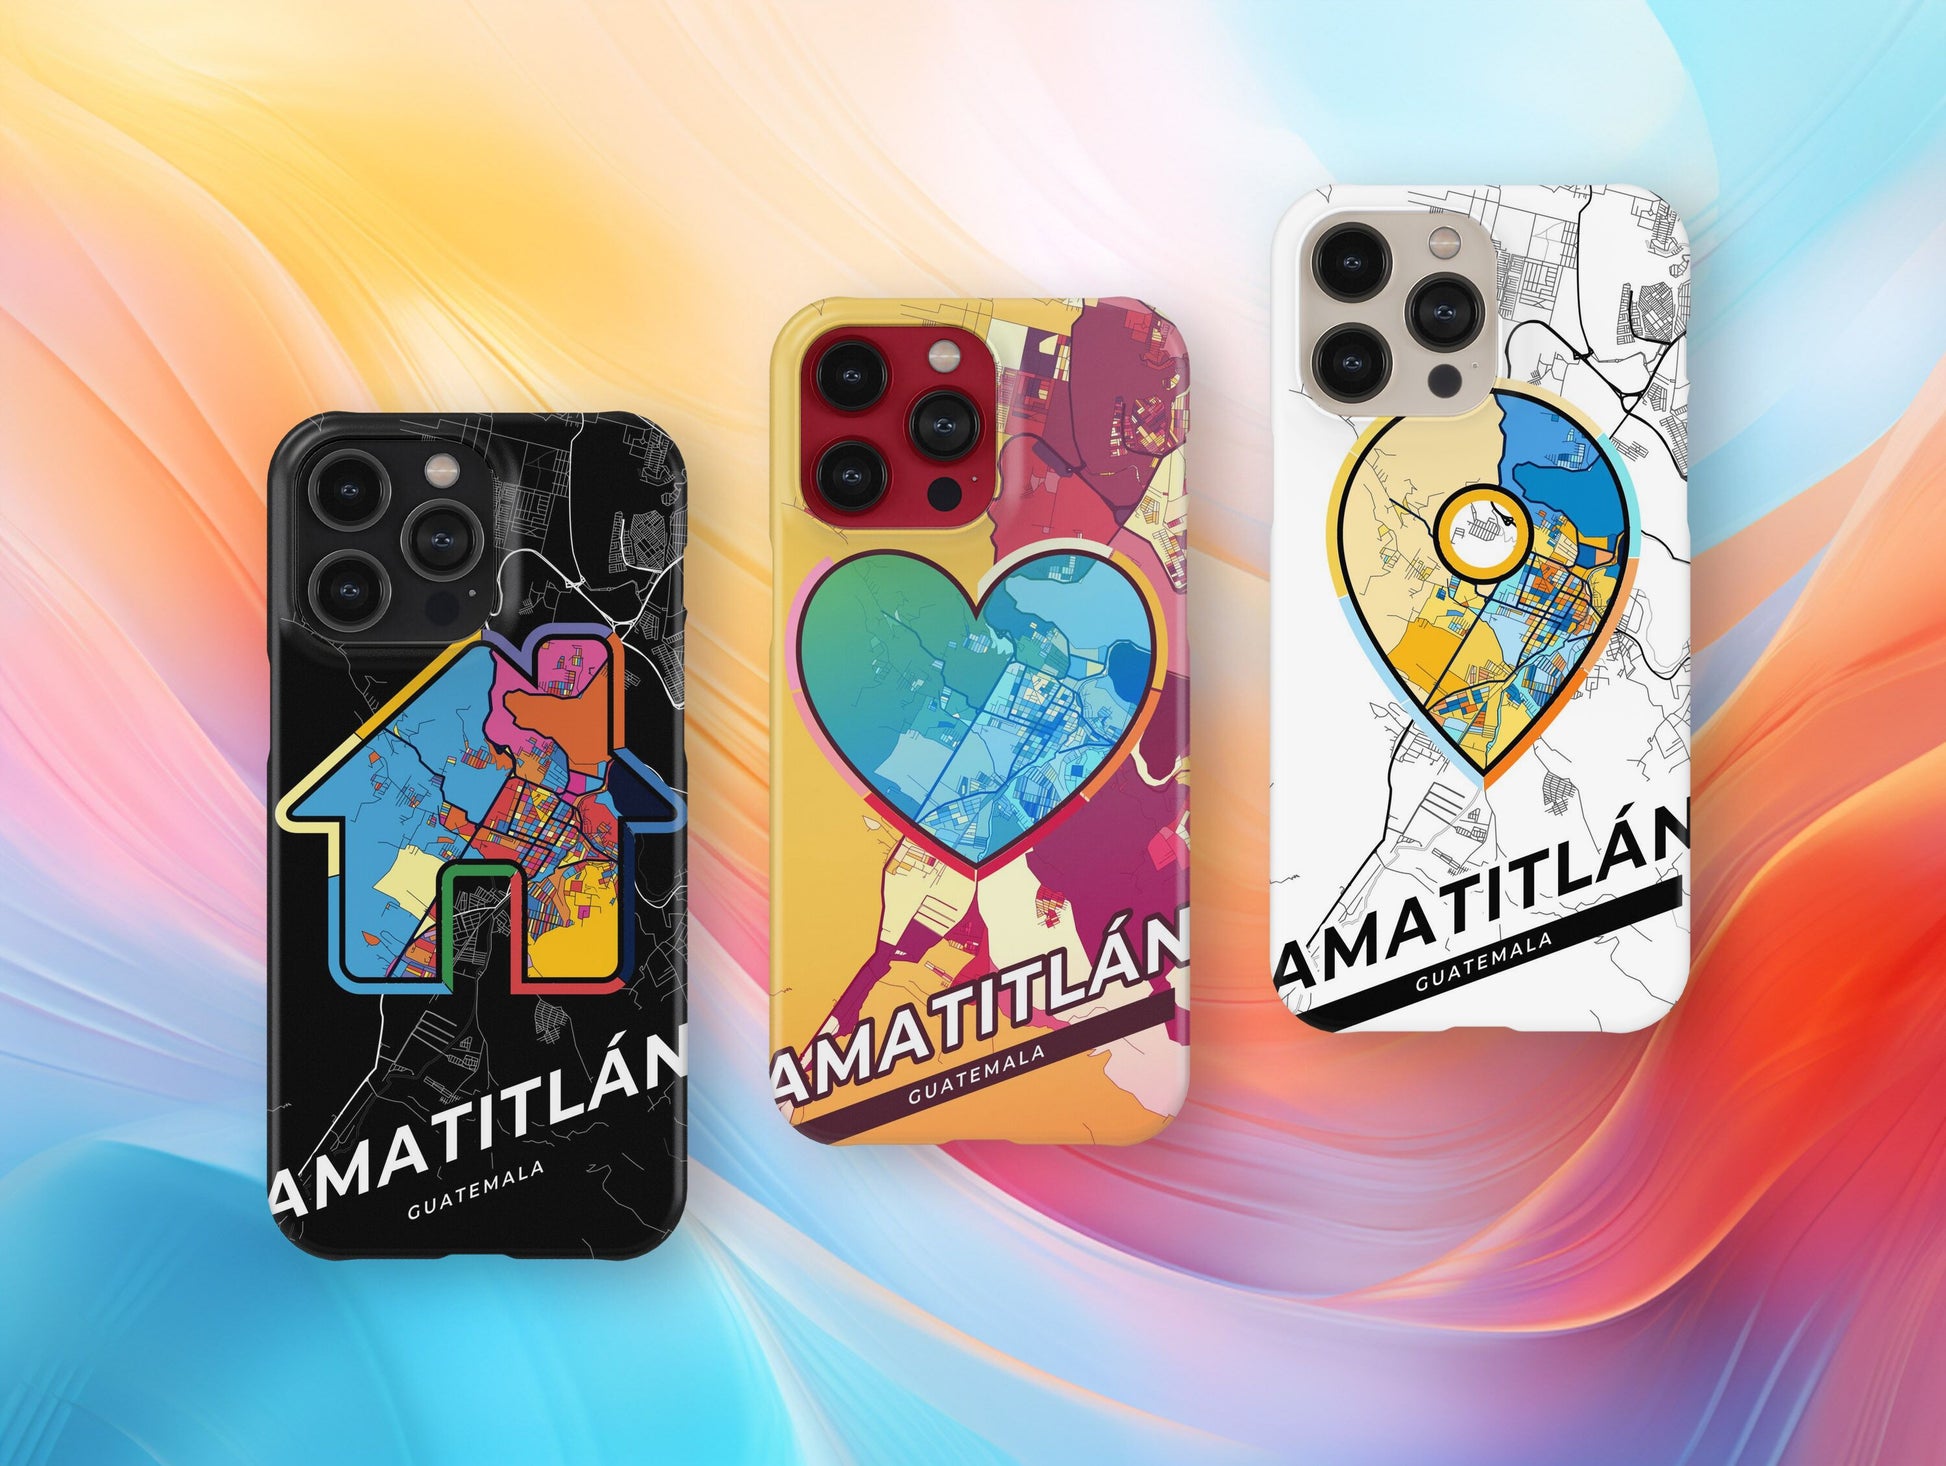 Amatitlán Guatemala slim phone case with colorful icon. Birthday, wedding or housewarming gift. Couple match cases.